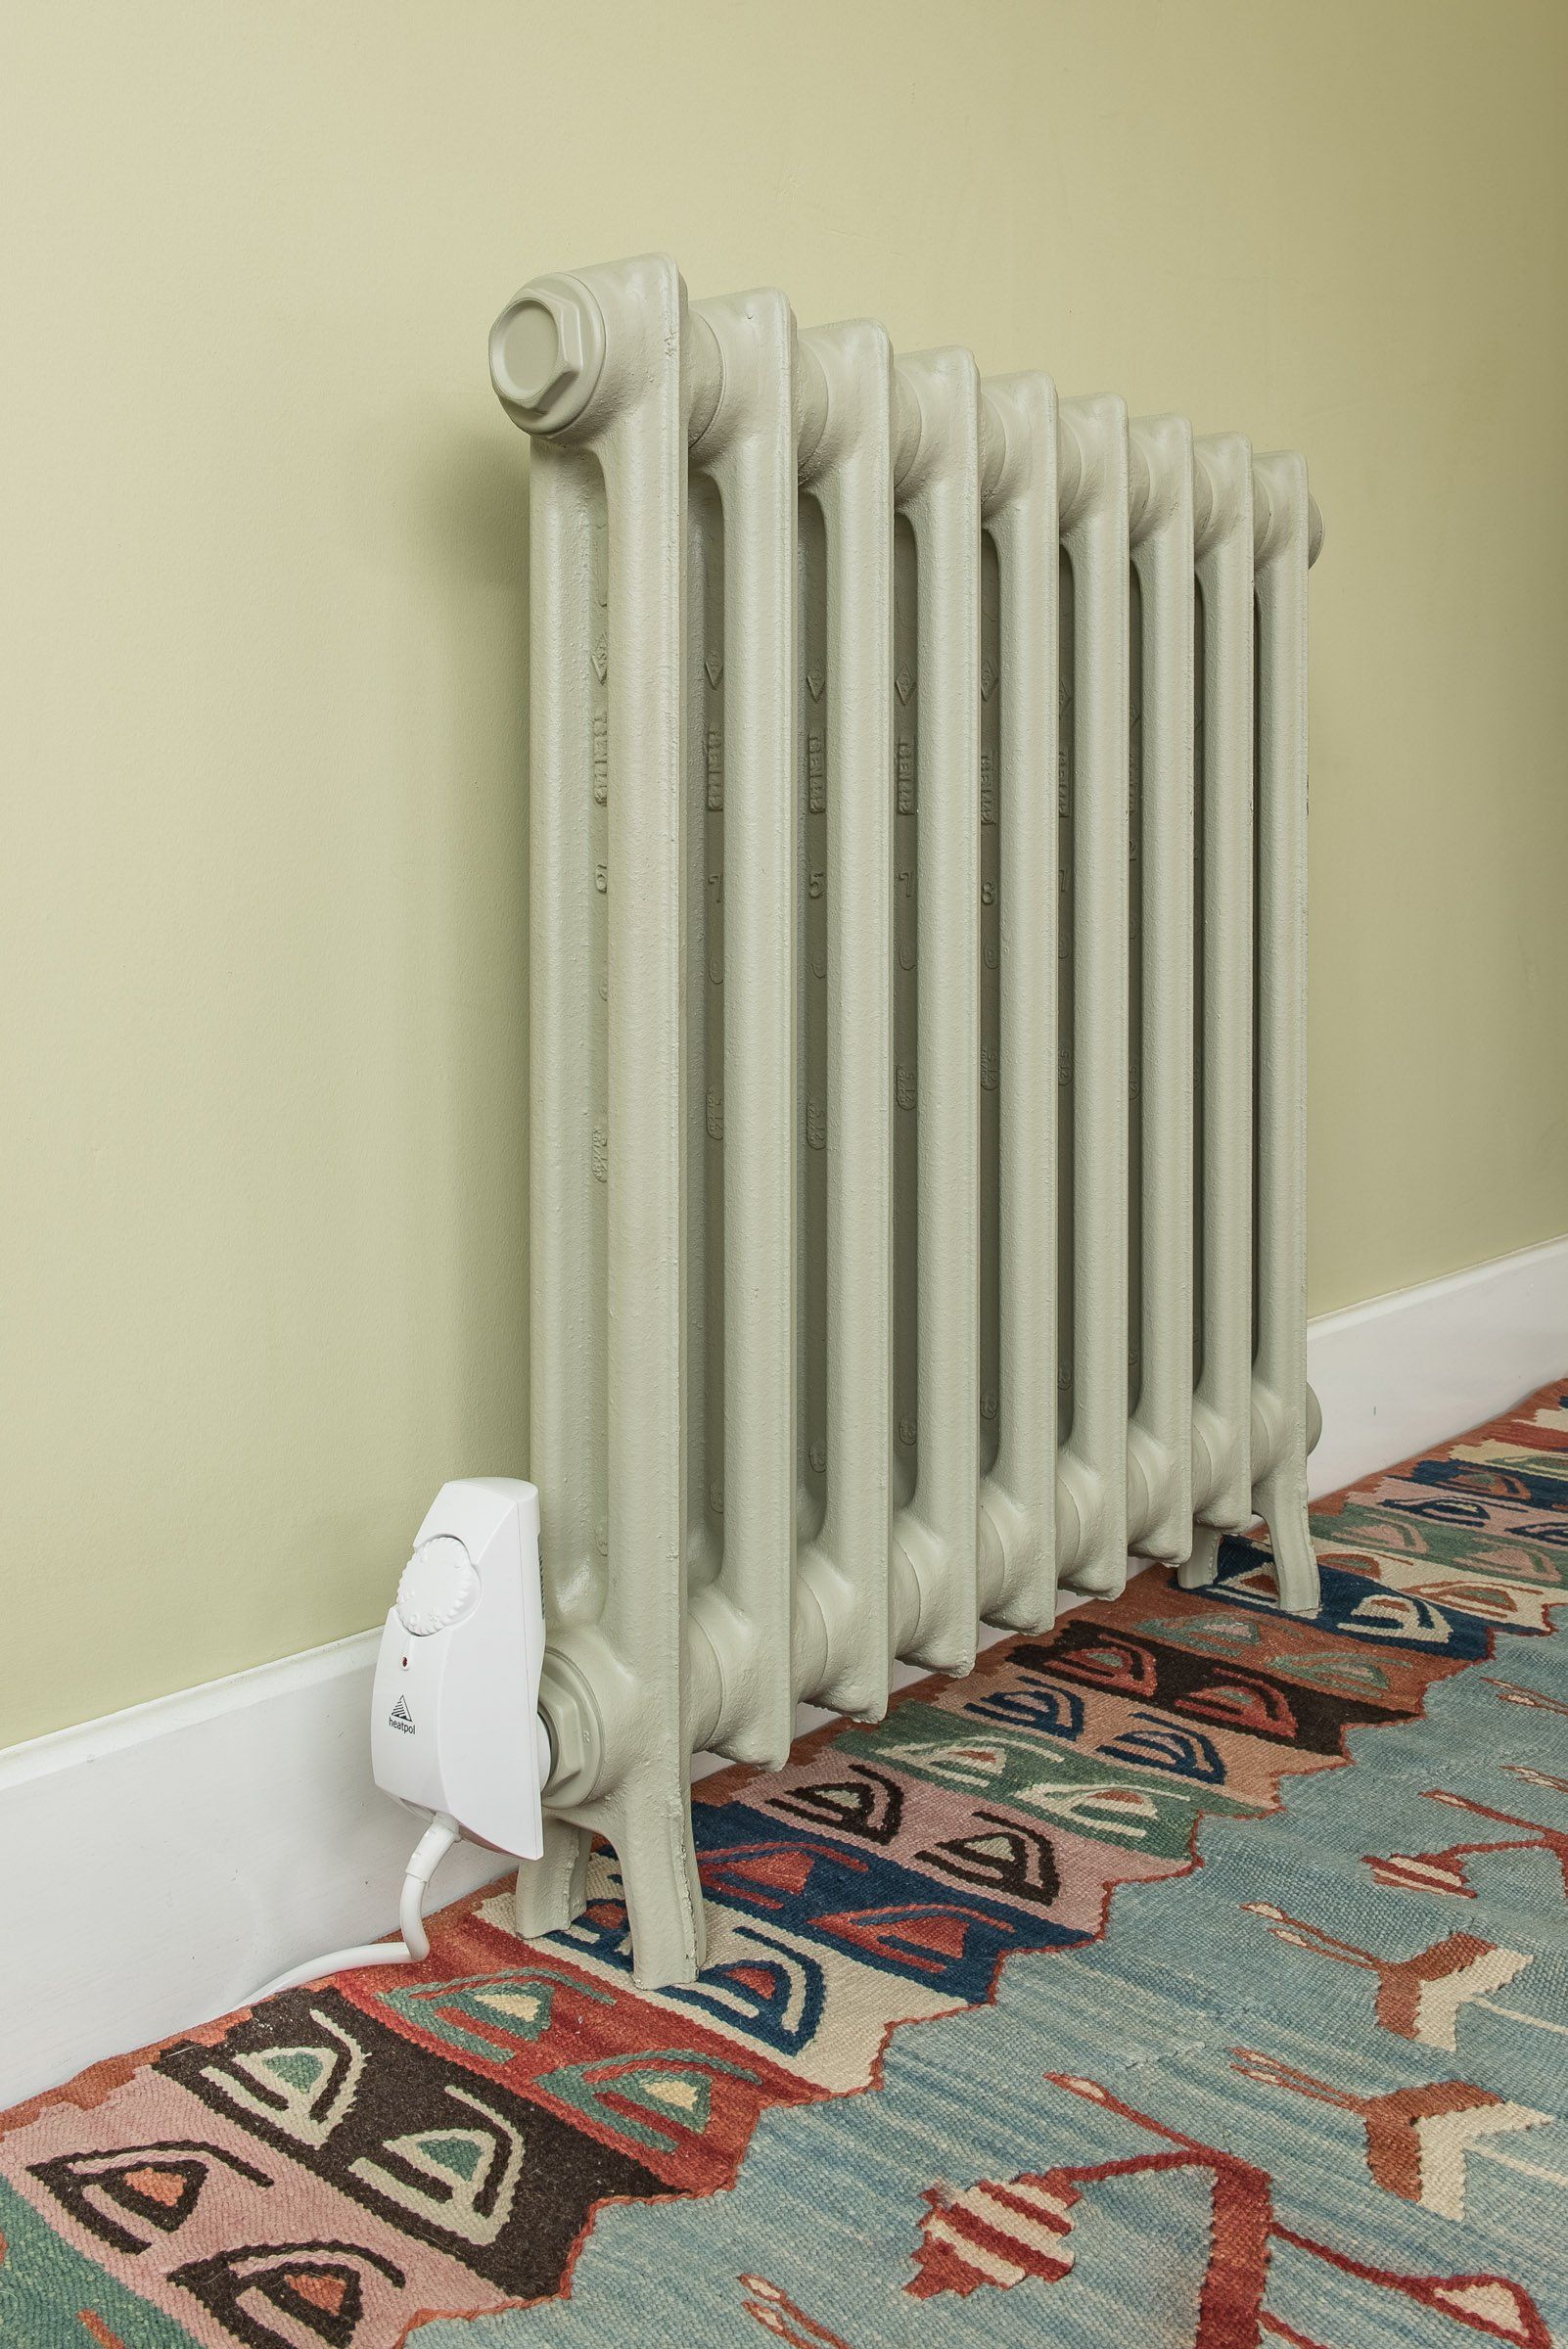 Wilberforce cast iron electric radiator in Farrow & Ball French Grey